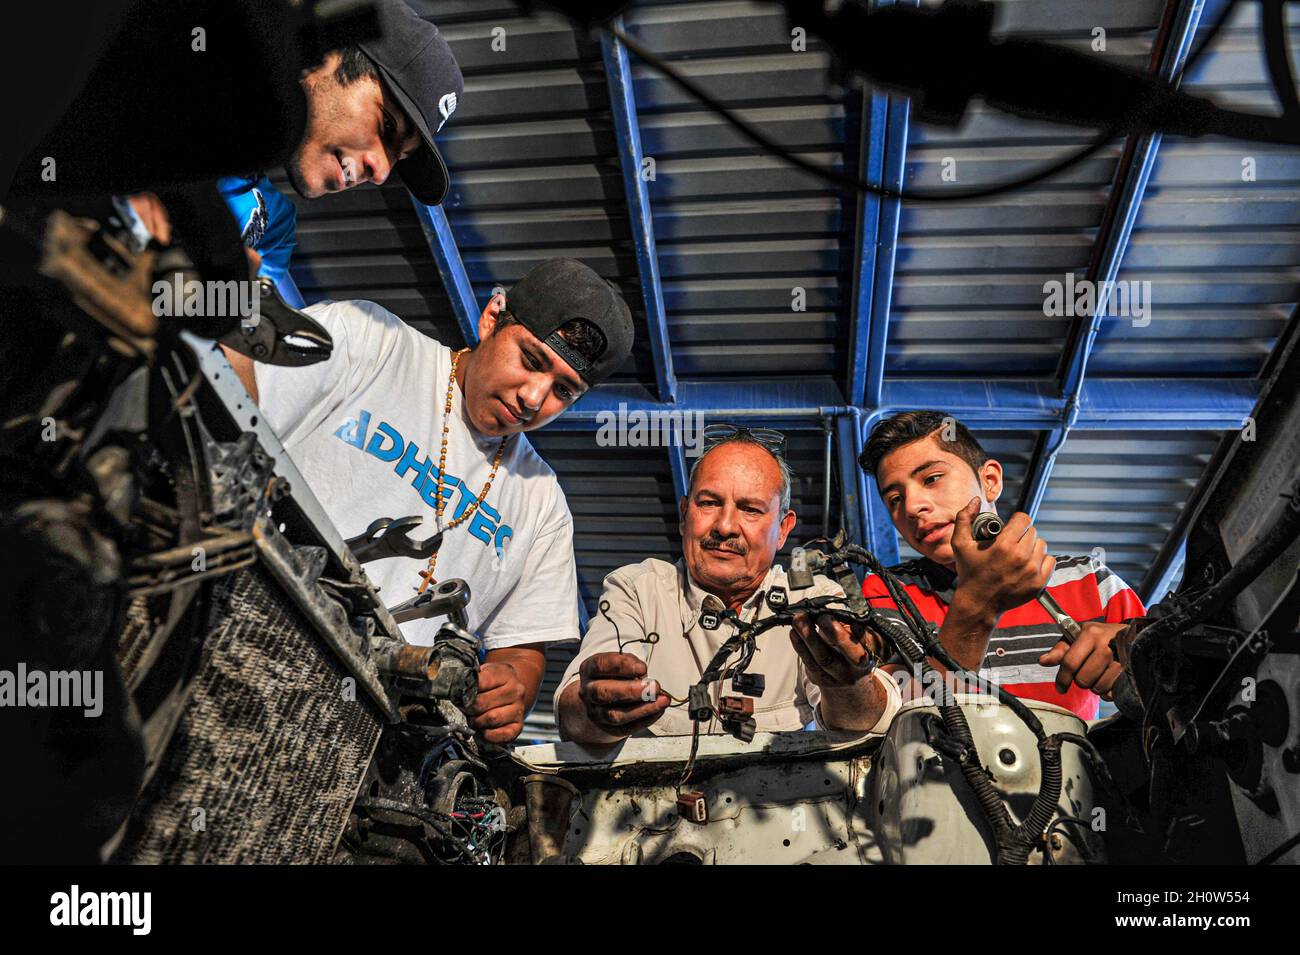 Electrical wiring, Mechanic and mechanical workshop repair of automotive air conditioning, automotive mechanics, electrical, electrical cars, auto, automotive. November 2015 ICATSON Workshops (Photo by Isrrael Garnica / NortePhoto)  Cableado electrico, Mecanico y taller mecanico reparacion de aire acondicionado automotirz, mecanica automotriz, electrico, electrico de autos, auto, automotor. Noviembre 2015  Talleres ICATSON (Photo by Isrrael Garnica/NortePhoto) Stock Photo